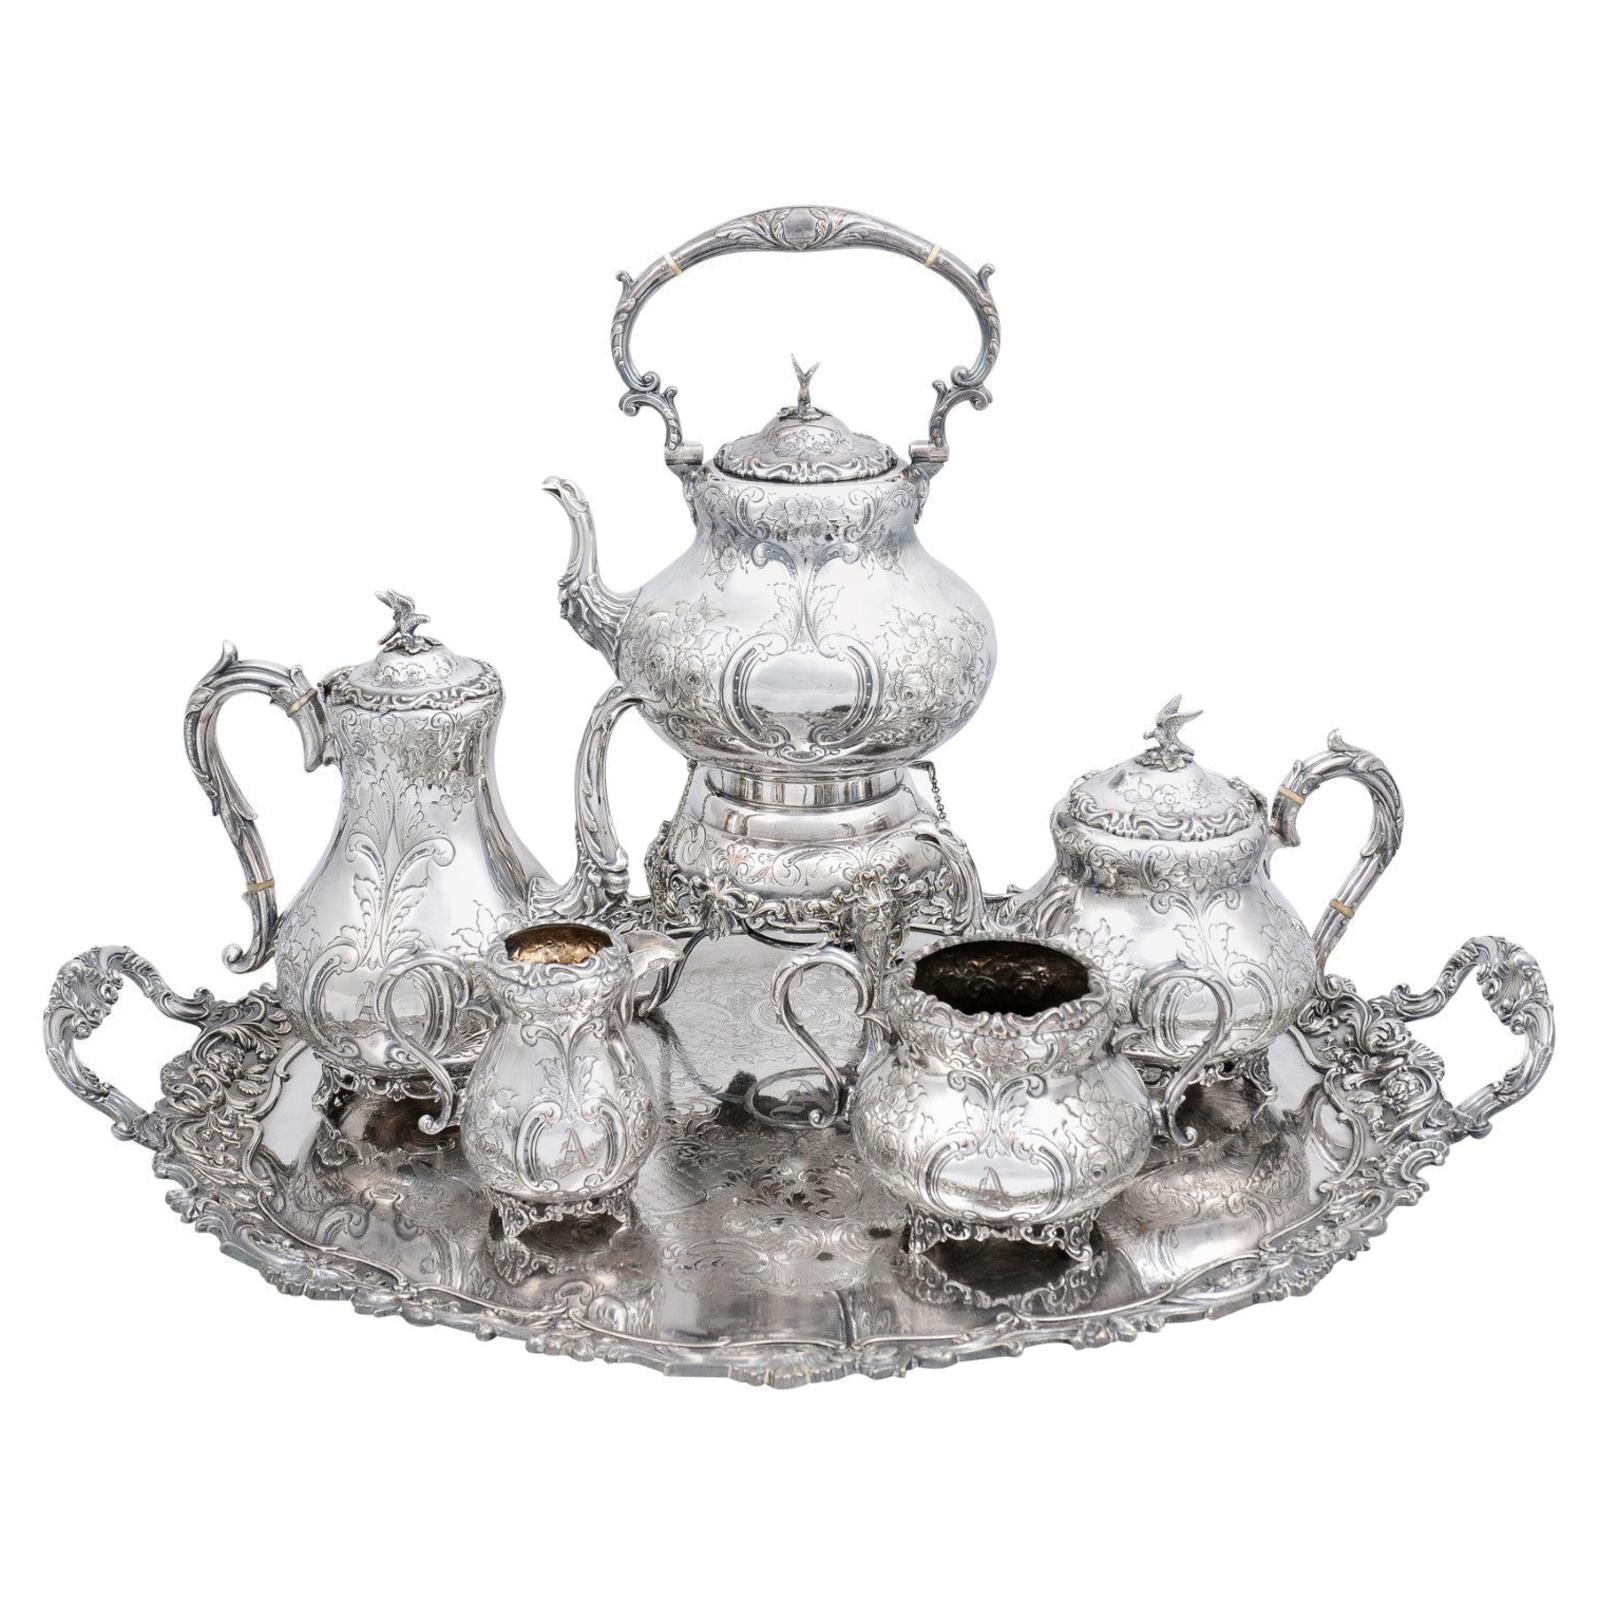 Victorian Period 19th Century Five-Piece Silver Tea and Coffee Set with Tray